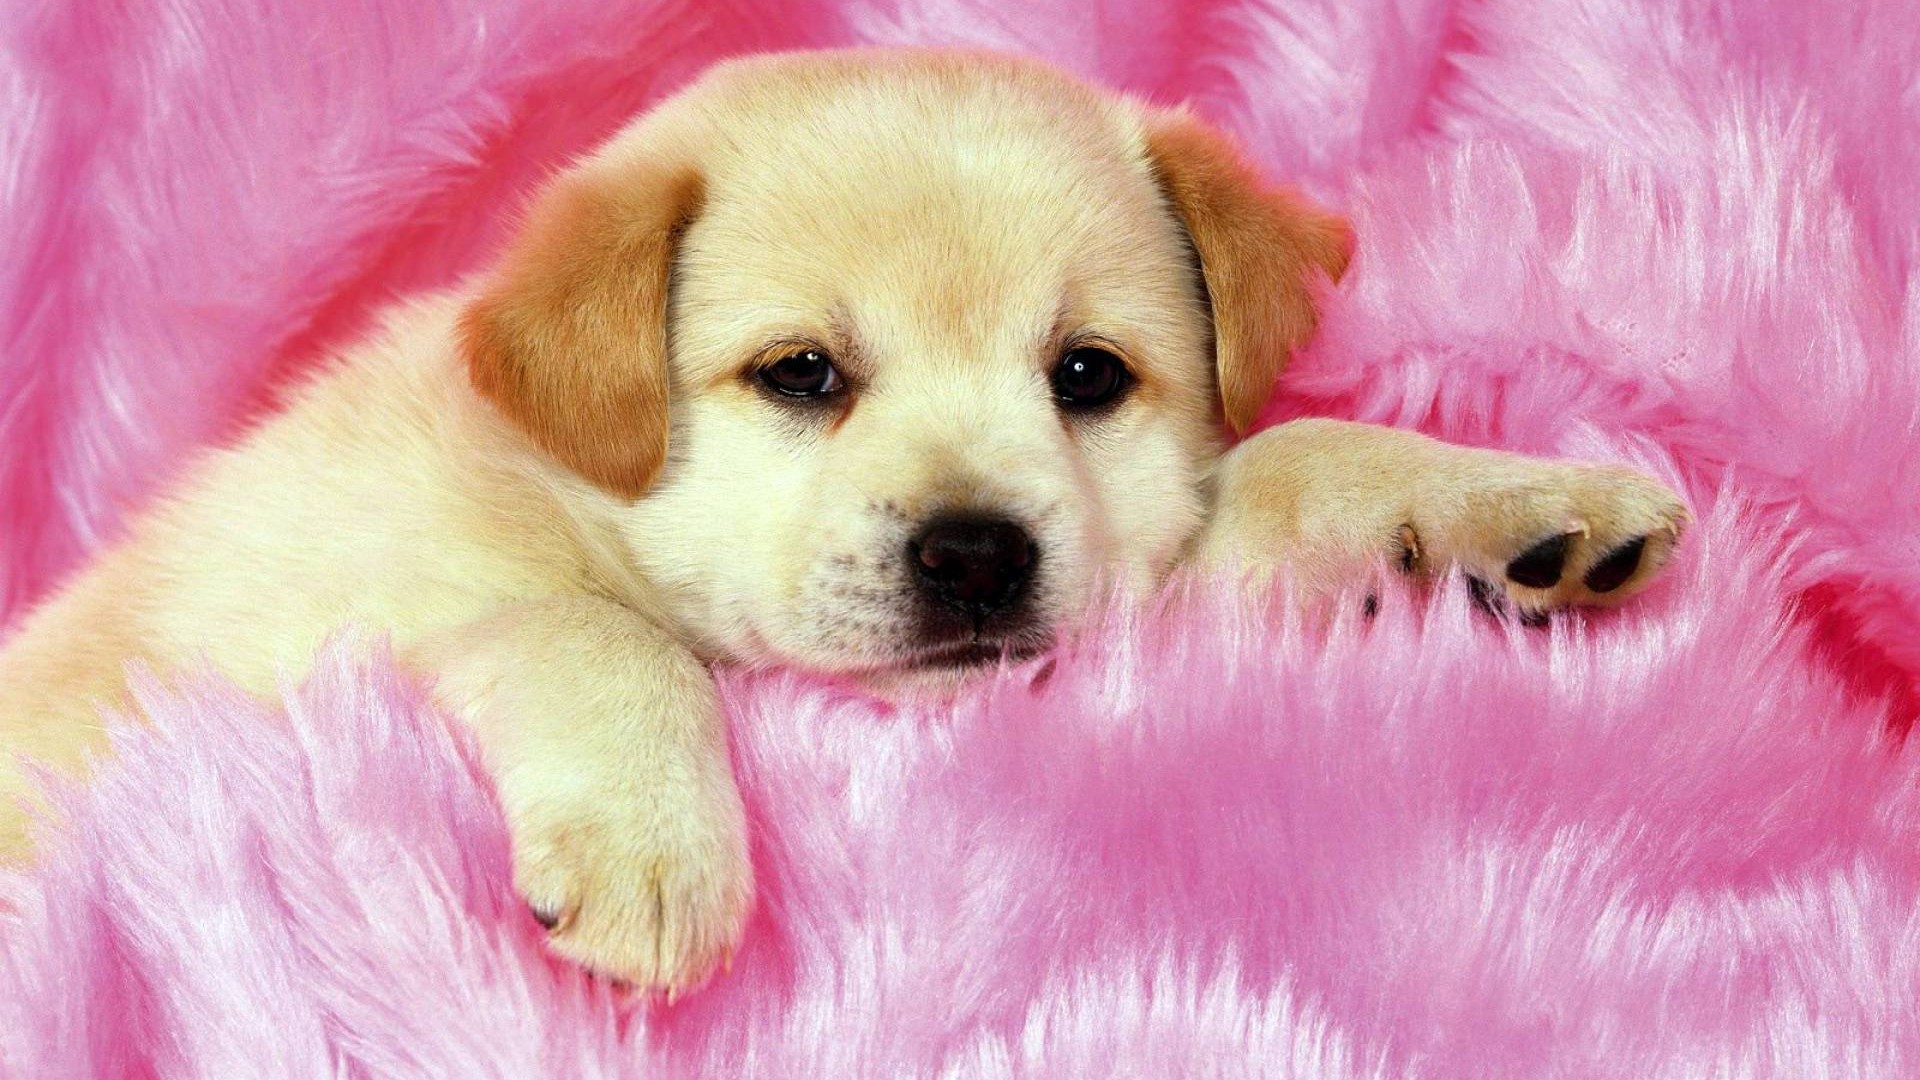 Wallpaper HD Pictures Of Puppies 1920x1080